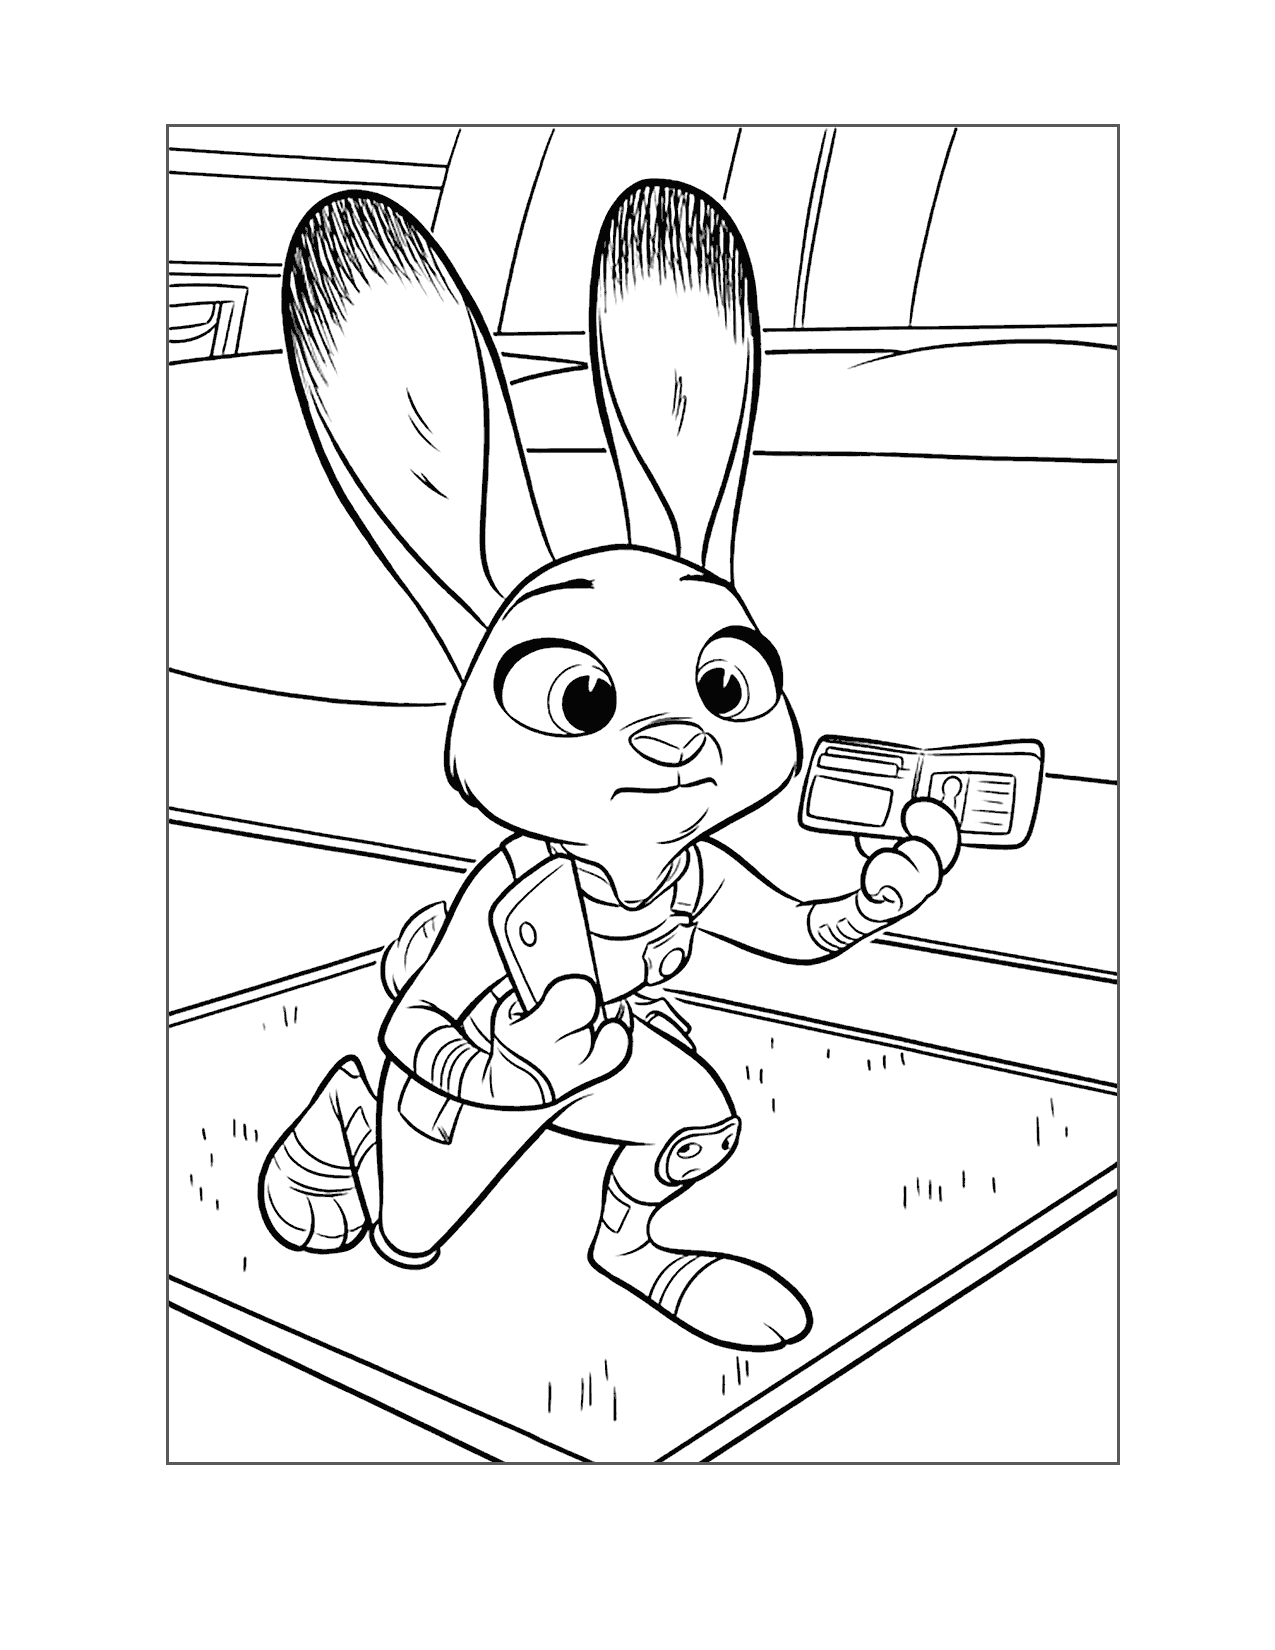 Judy Finds Ottertons Wallet Zootopia Coloring Page